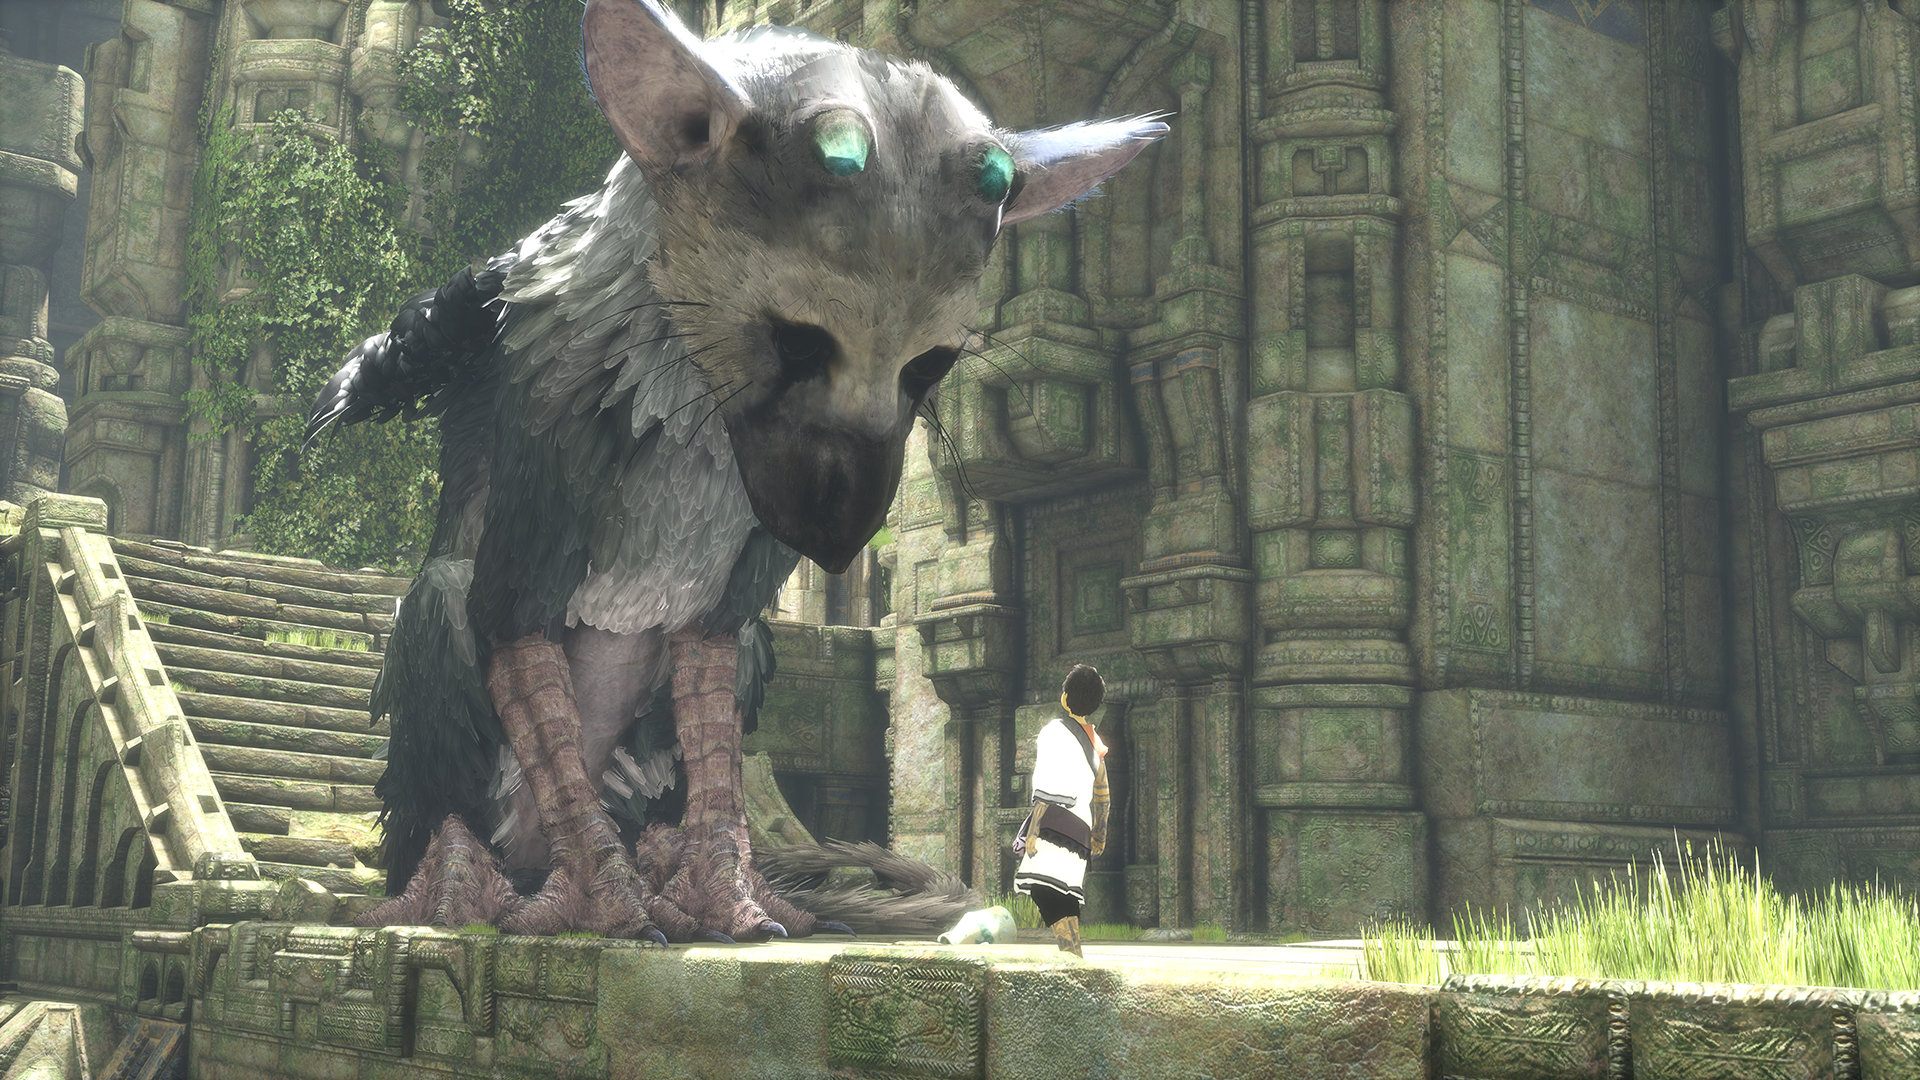 A boy and his bird dog in The Last Guardian.